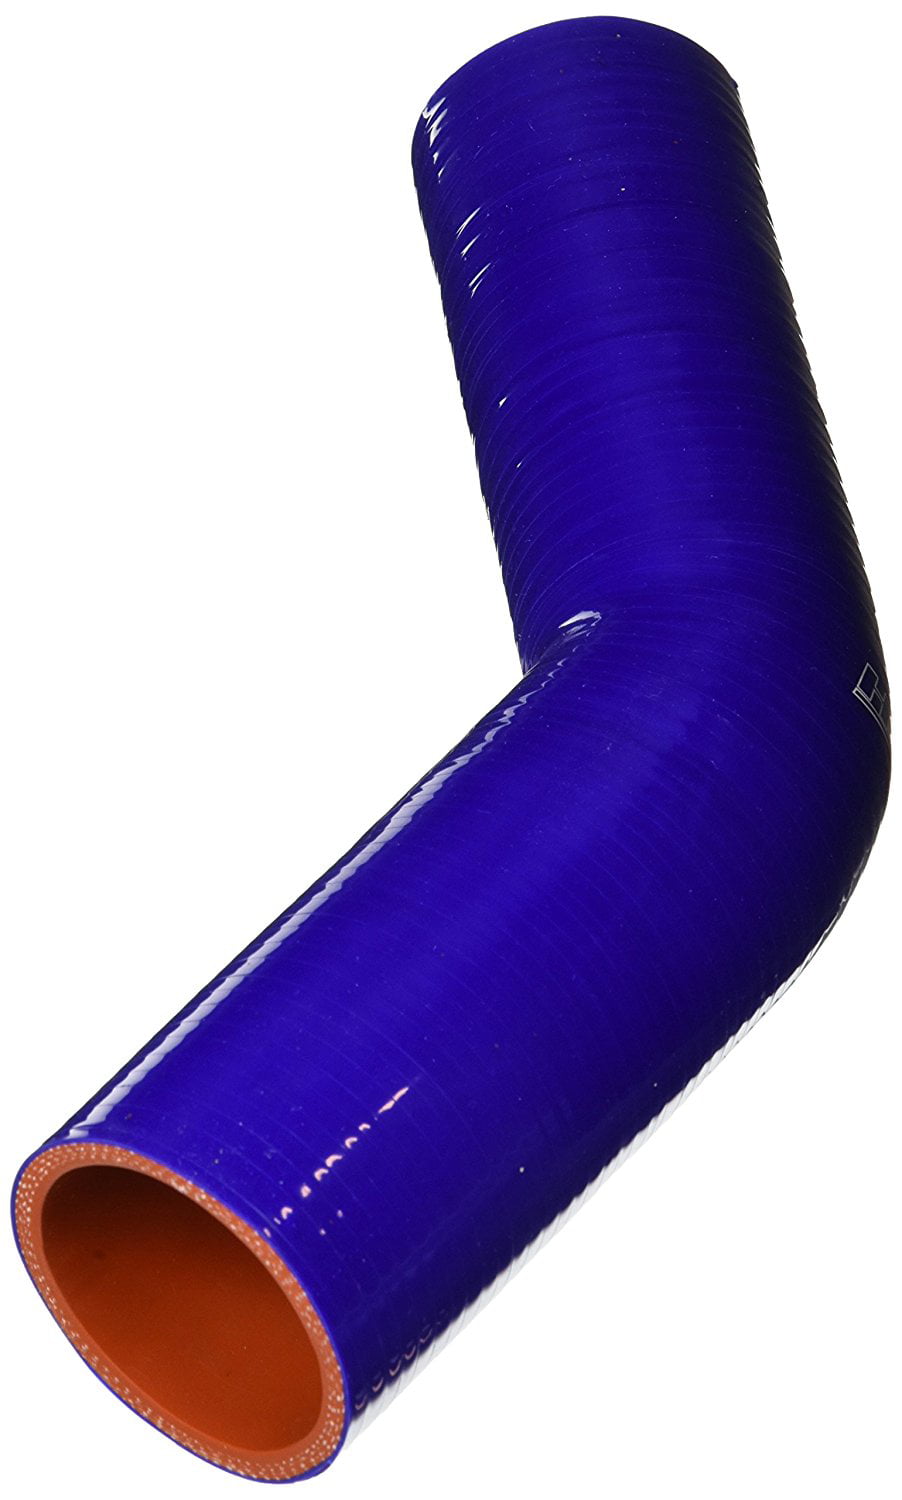 75 PSI Maximum Pressure 4 Leg Length on each side Black 1-1/4  1-3/8 ID HPS HTSER45-125-138-BLK Silicone High Temperature 4-ply Reinforced 45 degree Elbow Reducer Coupler Hose 